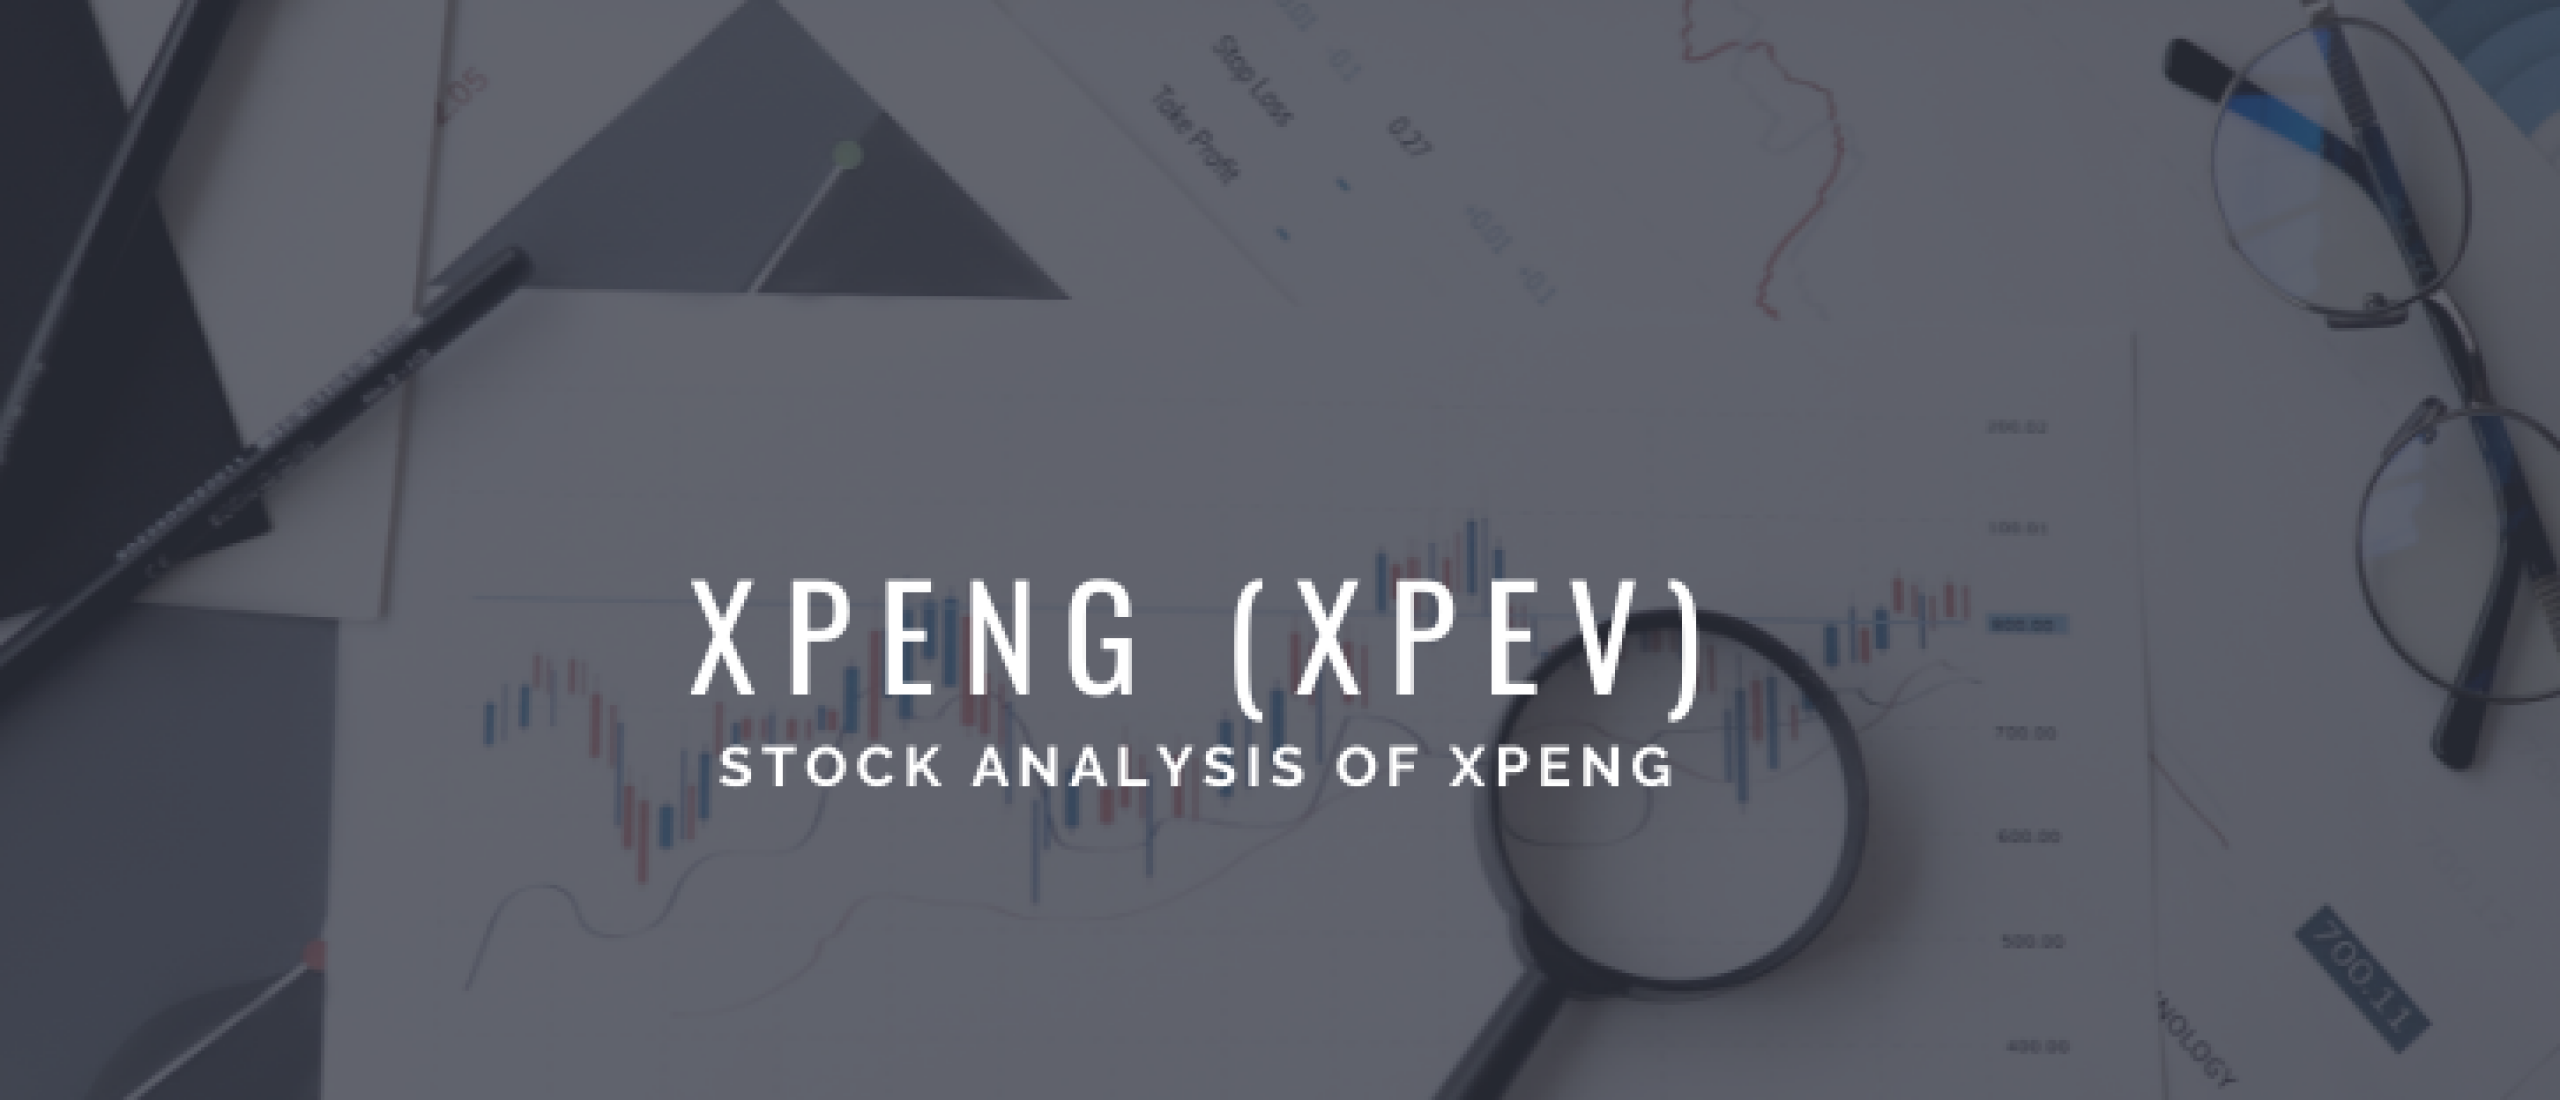 Stock Xpeng (XPEV) Analysis: Price Forecast, Risks, Strategy [2022]